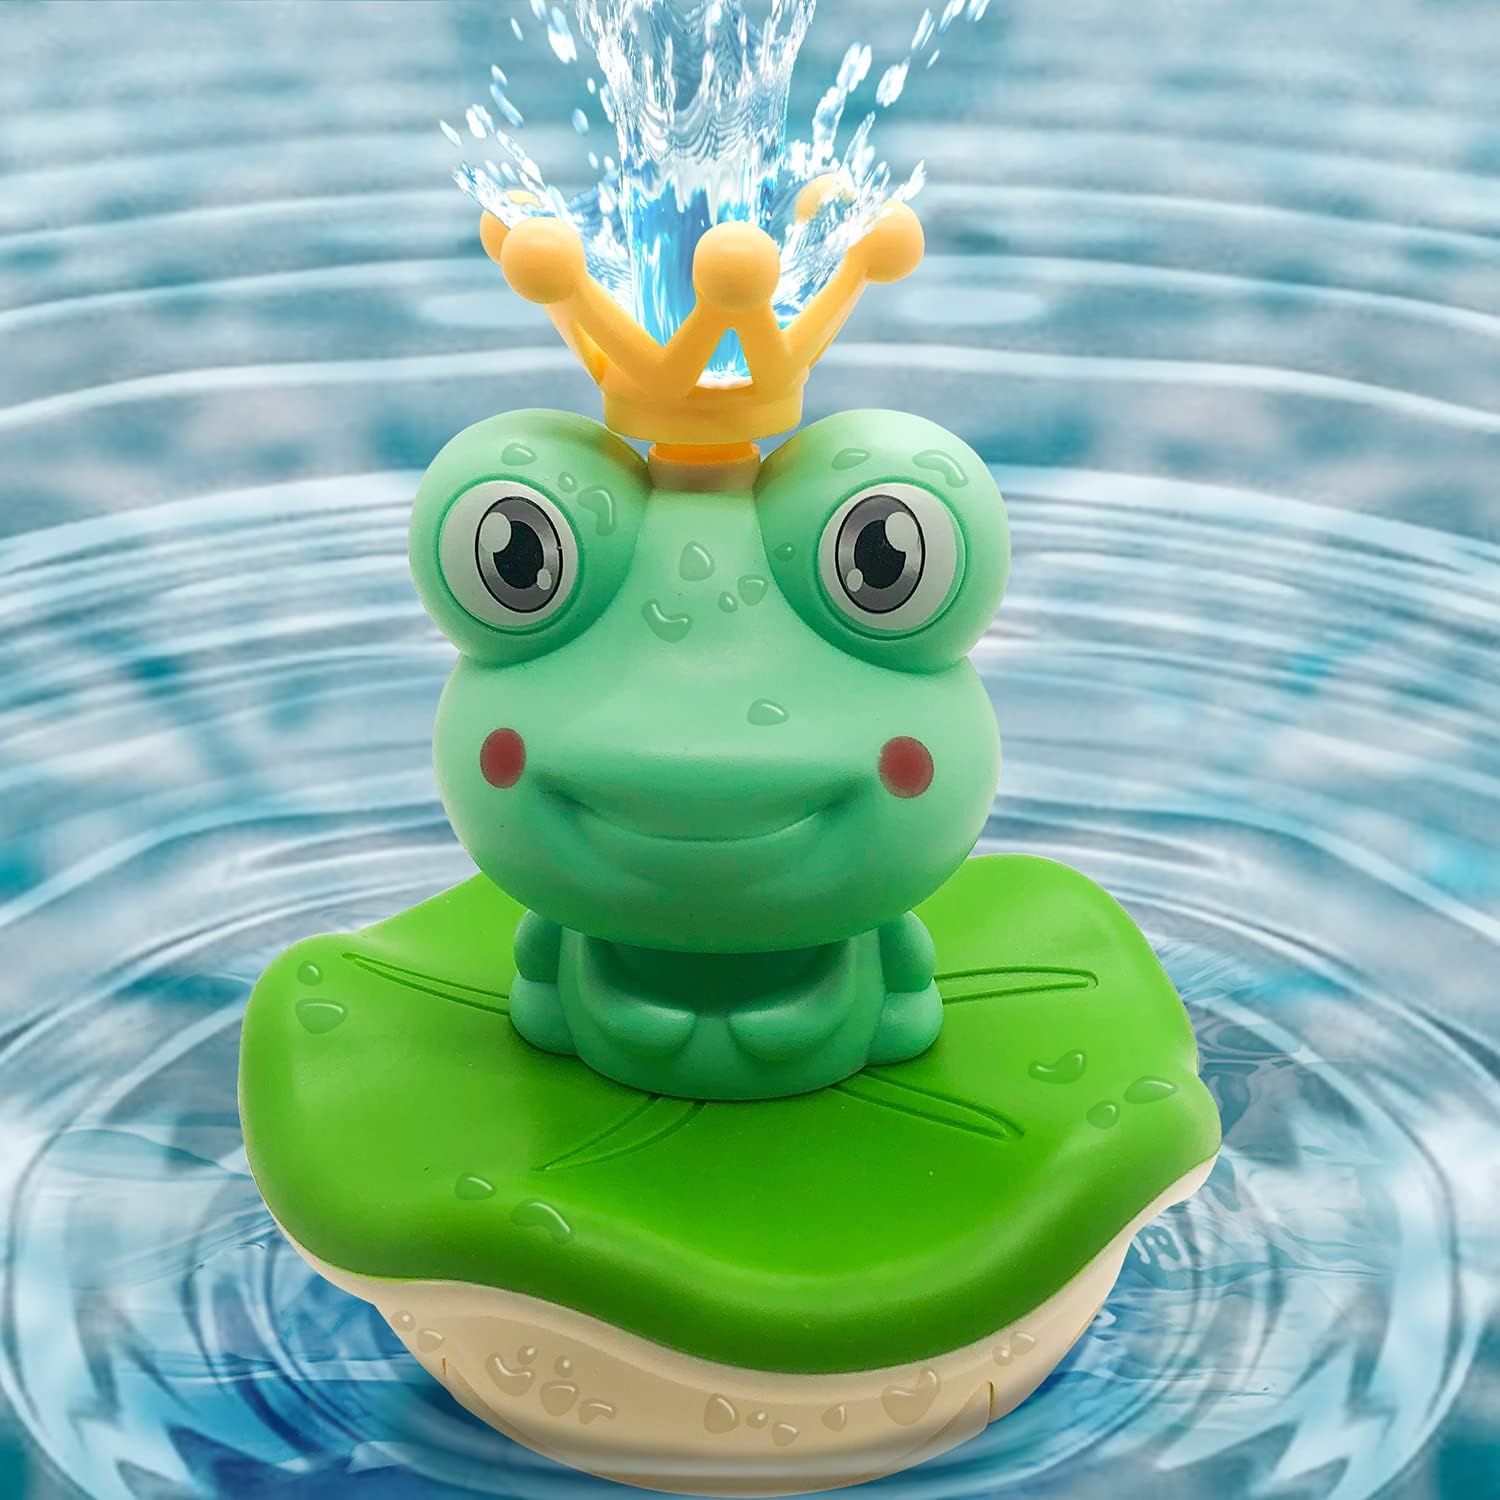 ArtCreativity Frog Bath Sprinkler Toy Set, Includes 1 Frog Fountain, 4 Nozzles, and 1 Ball, Battery-Operated Bathtub and Swimming Pool Toy for Kids, Great Gift for Boys and Girls Ages 3 and Up